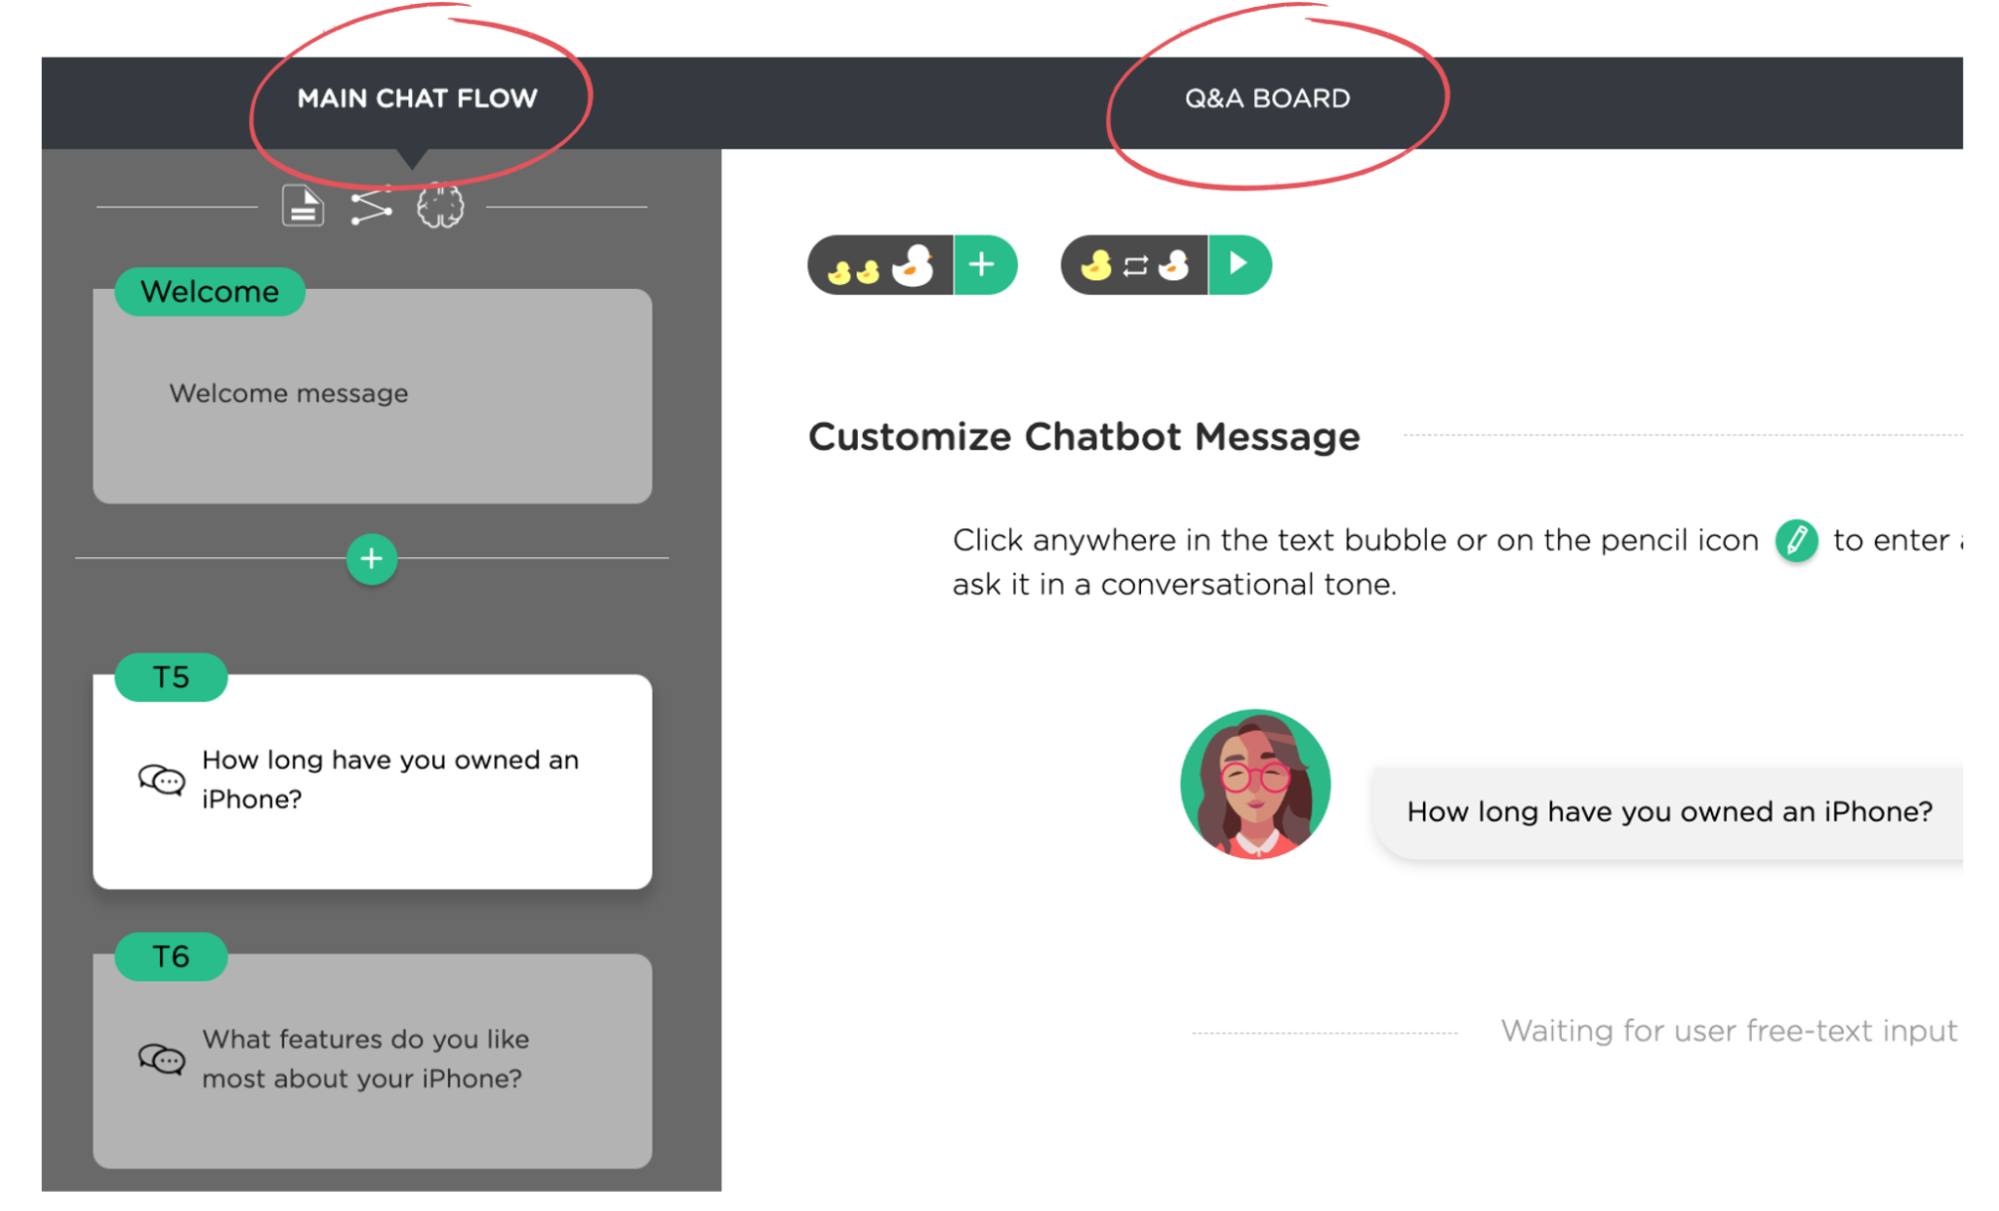 Example Juji chatbot design page for customize both chat flow and Q&A